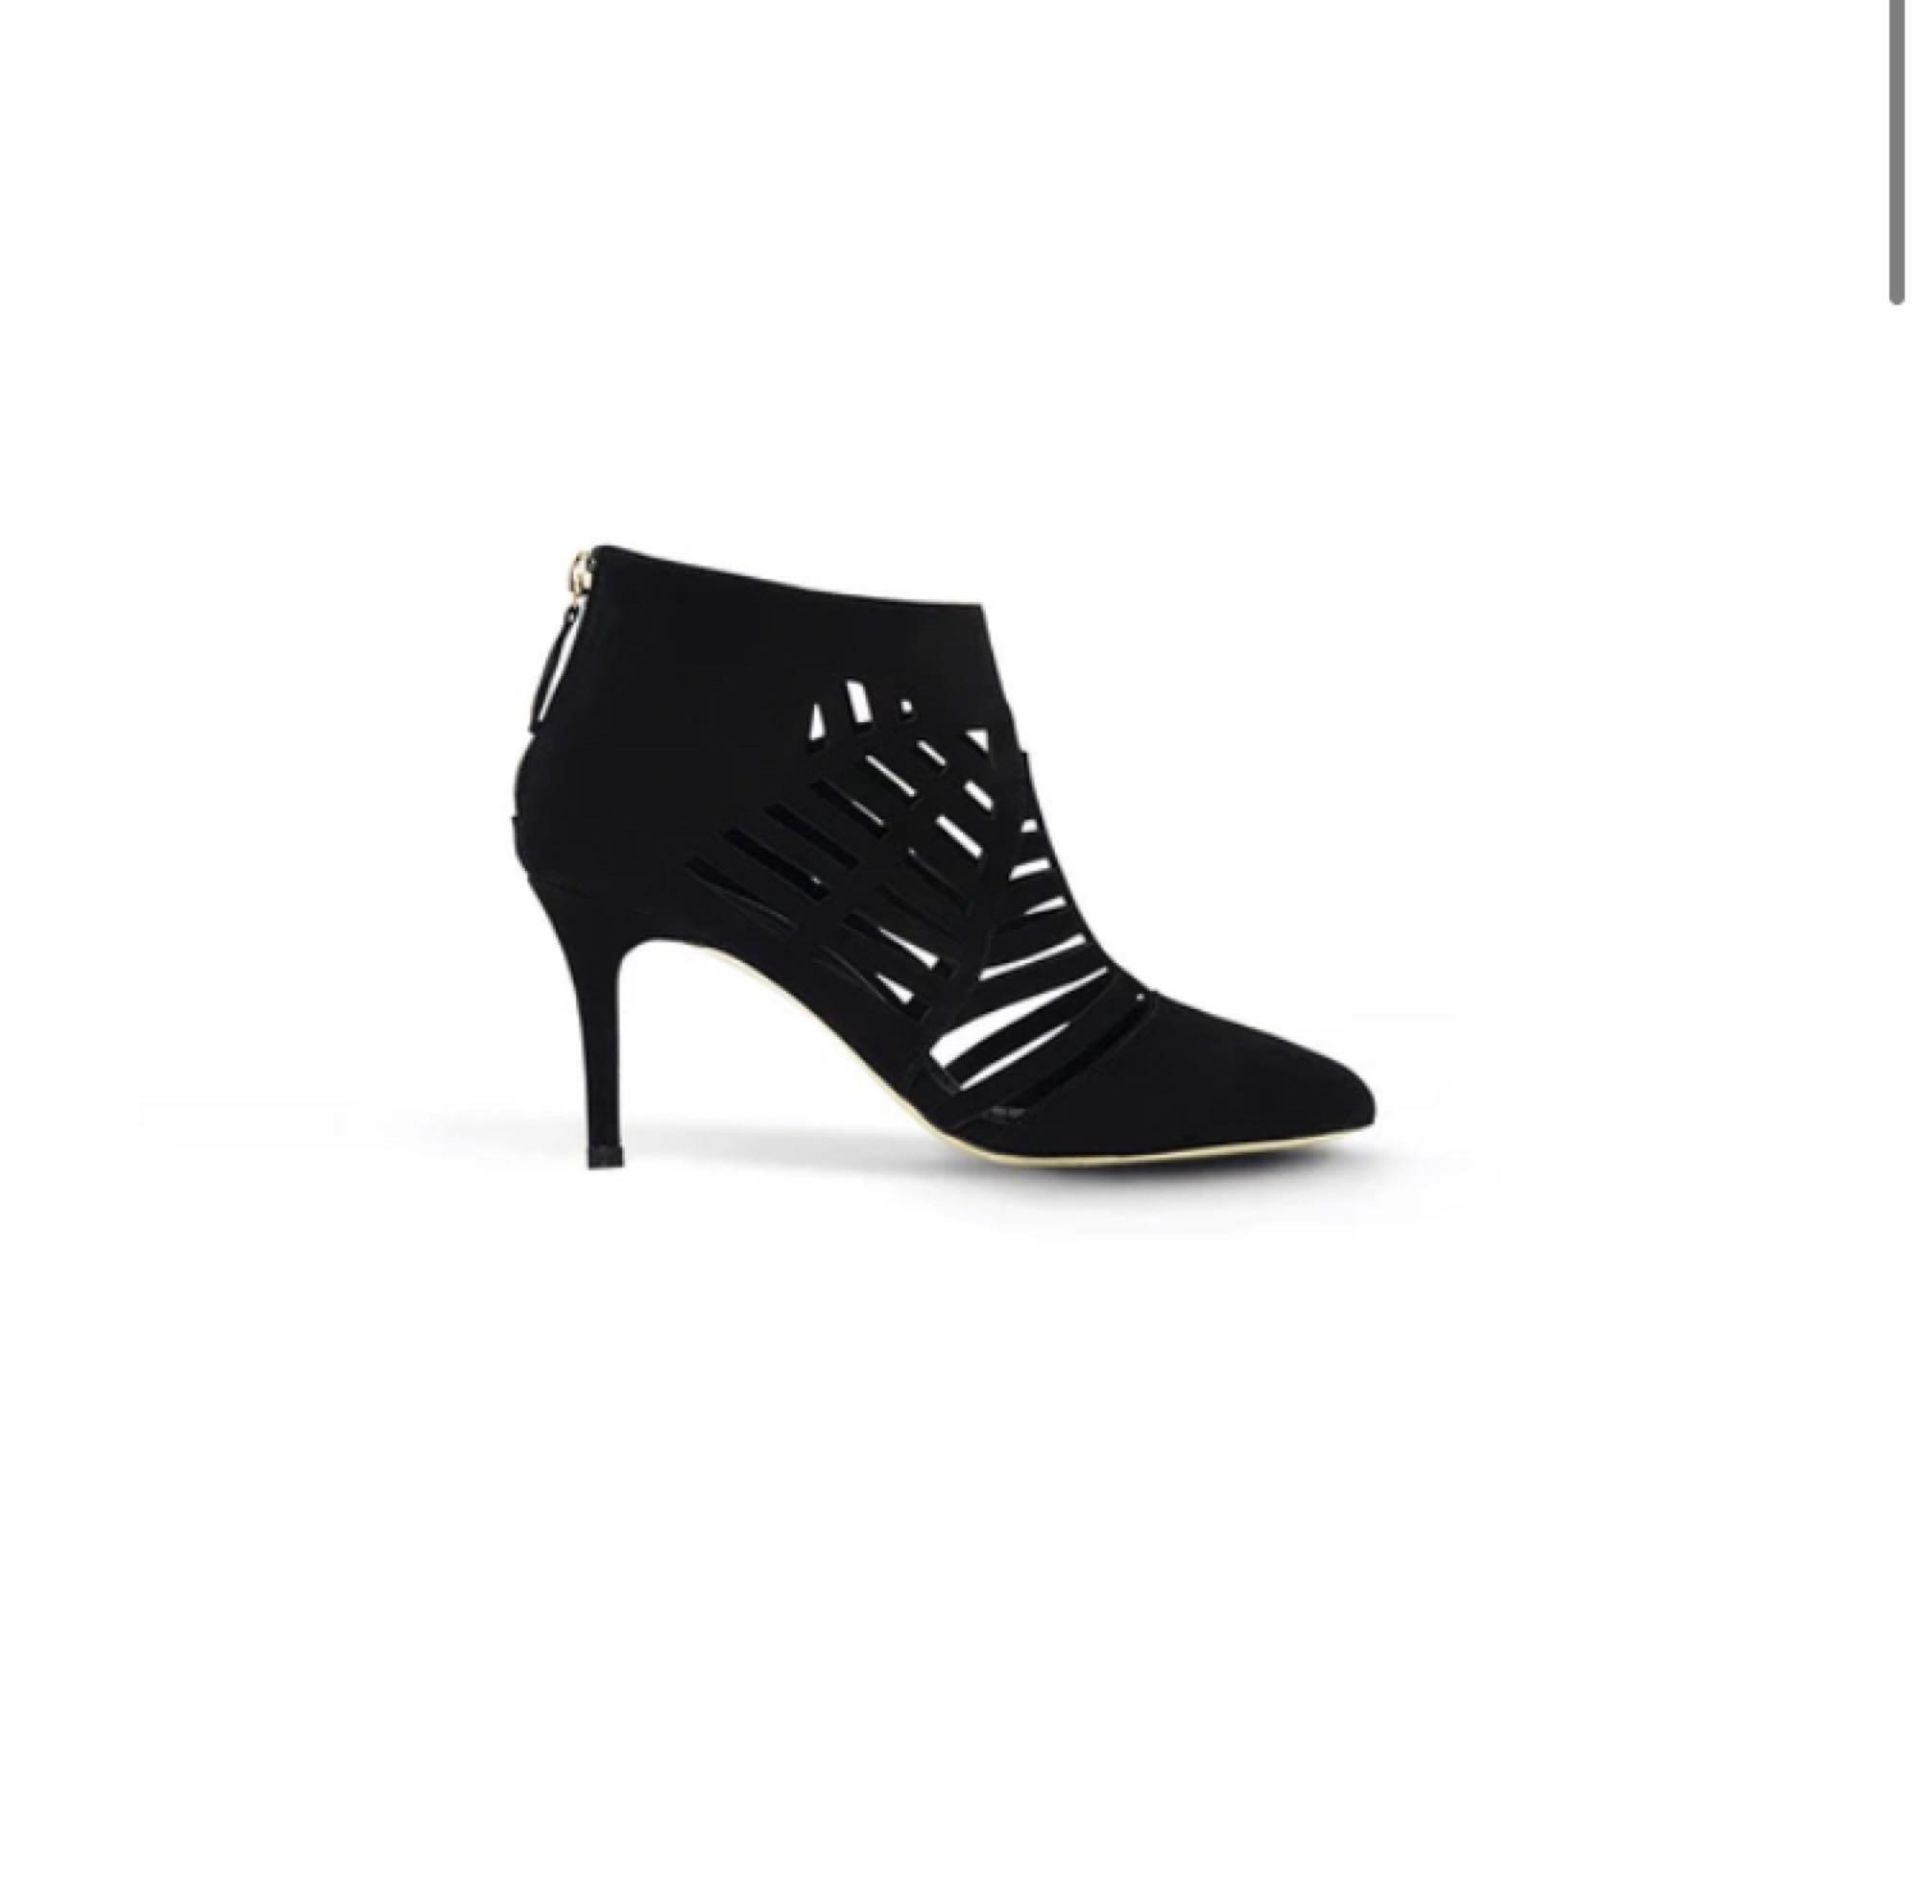 (Jb) RRP £225 Lot To Contain 1 Brand New Boxed Sargossa Spider Heels In Black/Suede Size Uk 7 (67.08